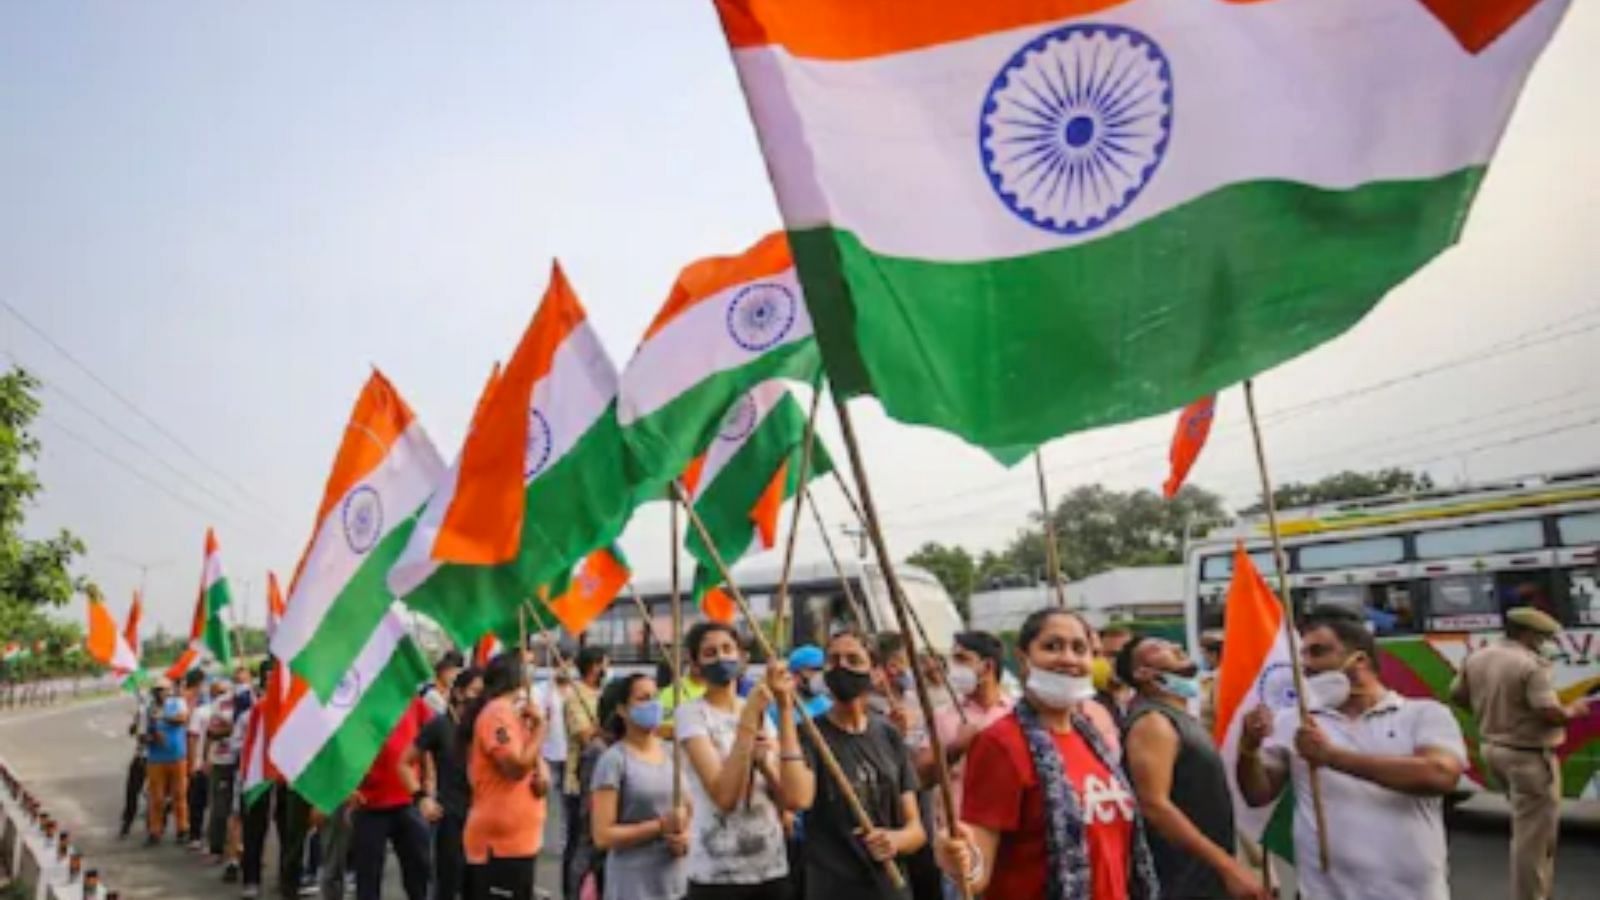 <div class="paragraphs"><p>BJP leader Kuljeet Singh Chahal is among six persons booked for taking out a 'Tiranga Yatra' without permission in Delhi. Representational image.</p></div>